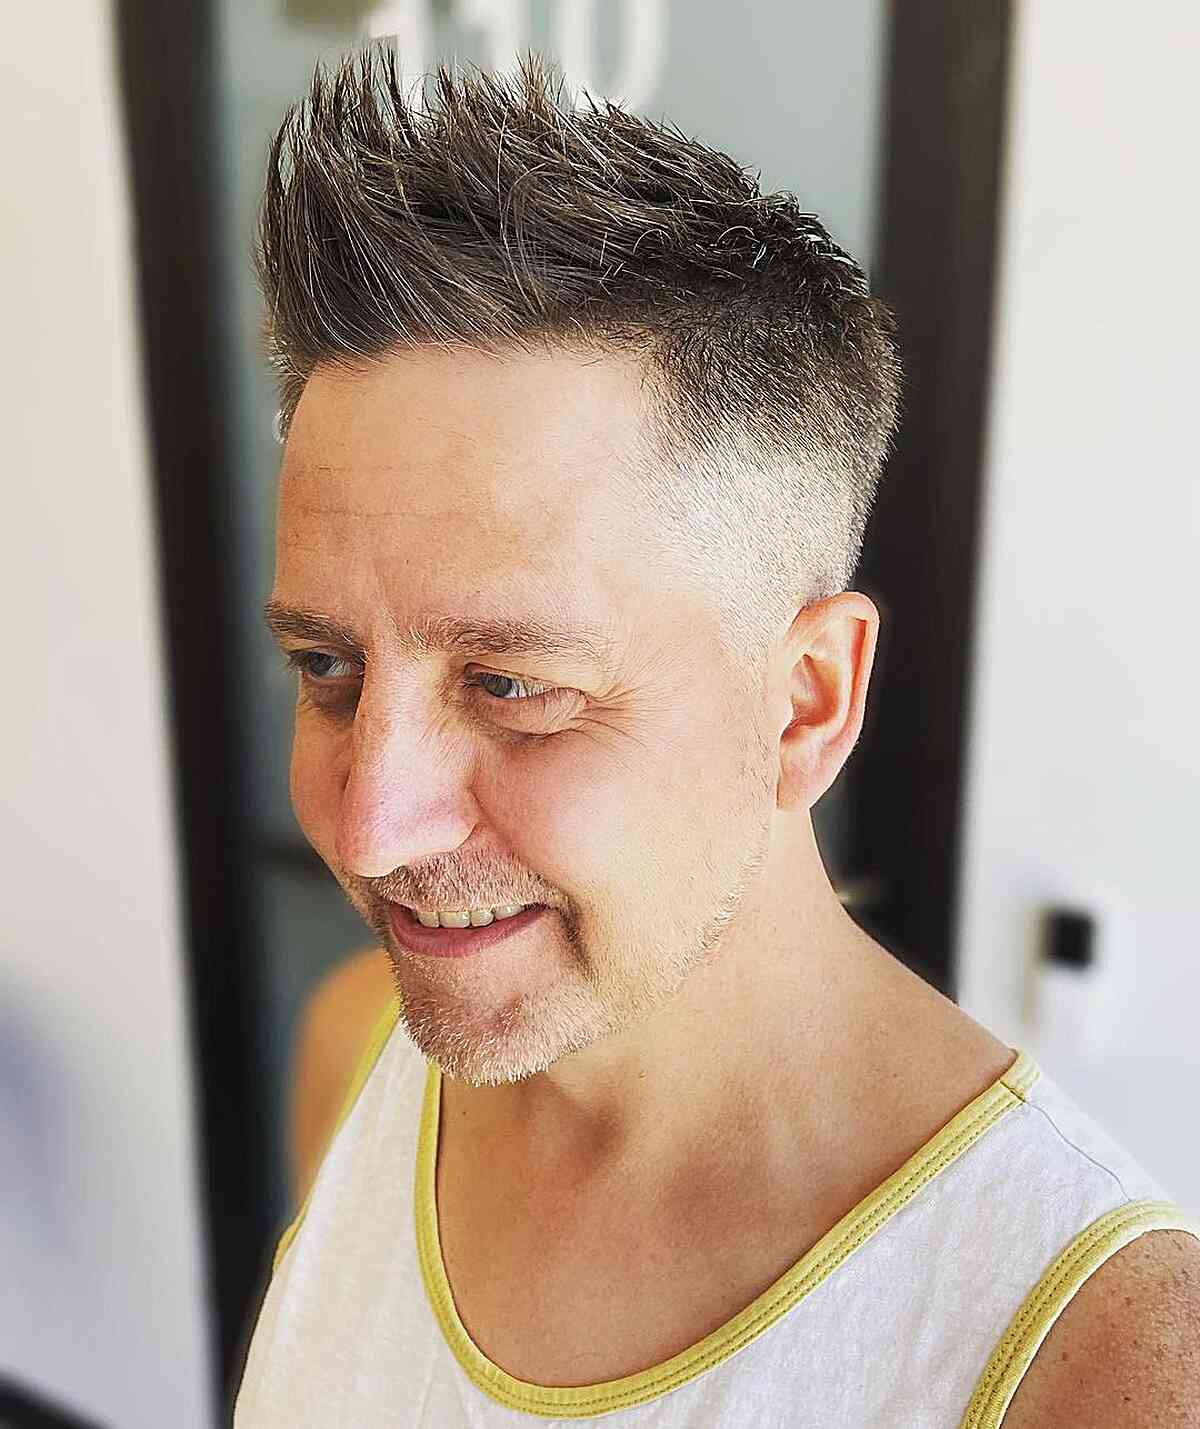 Men's Faux Hawk with Tousled Spikes and Buzzed Sides